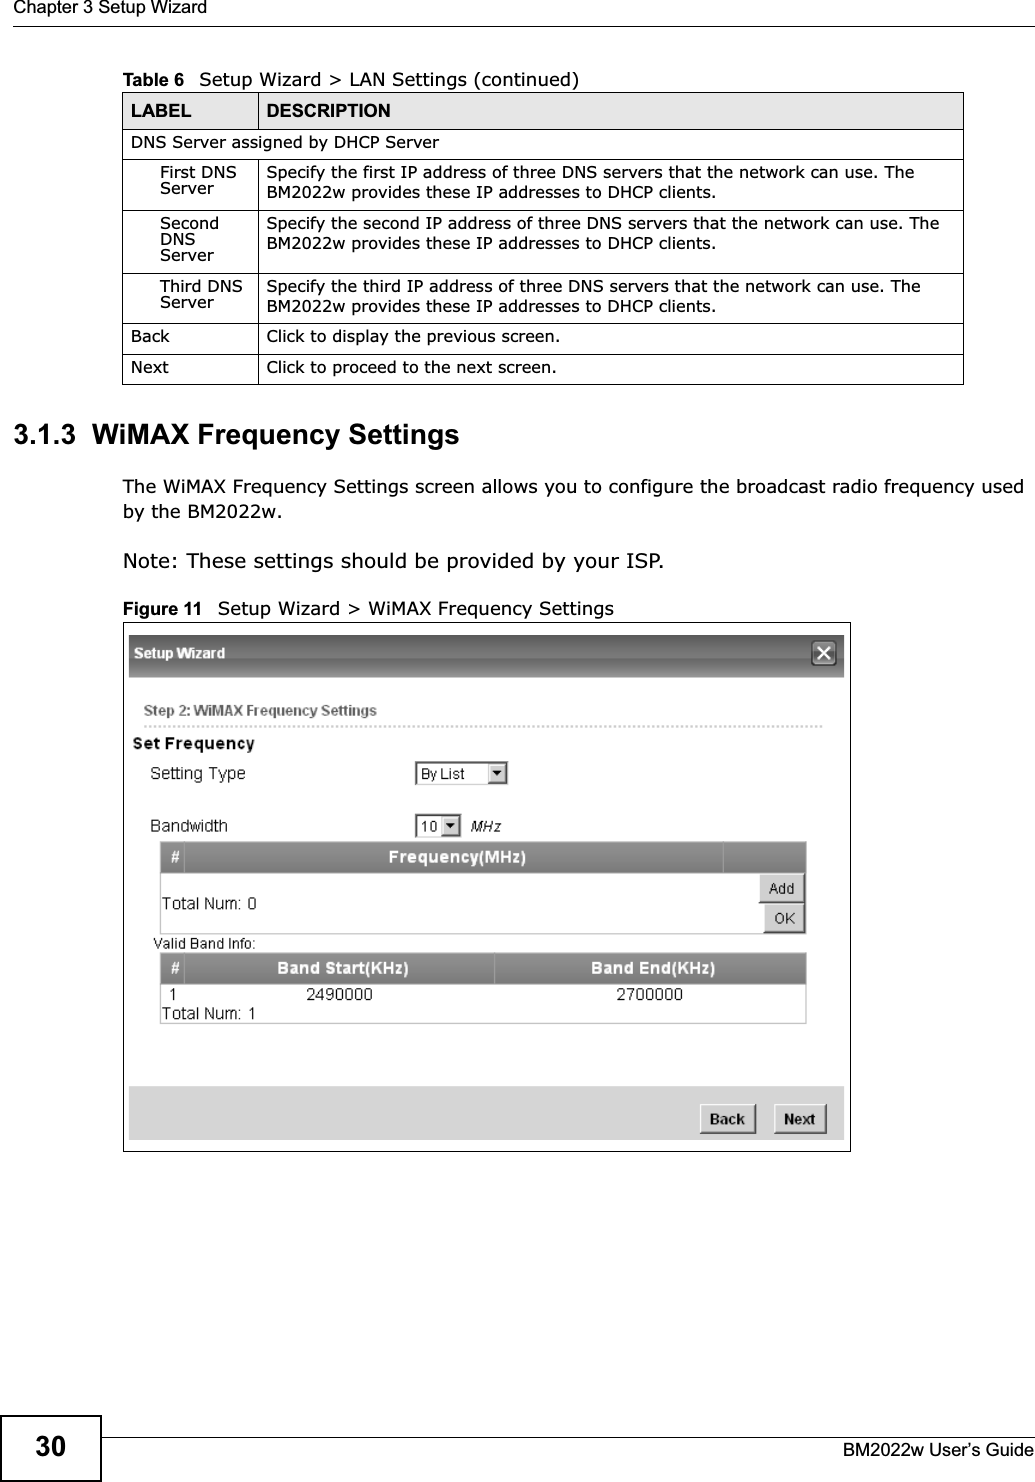 Chapter 3 Setup WizardBM2022w User’s Guide303.1.3  WiMAX Frequency SettingsThe WiMAX Frequency Settings screen allows you to configure the broadcast radio frequency used by the BM2022w.Note: These settings should be provided by your ISP.Figure 11   Setup Wizard &gt; WiMAX Frequency SettingsDNS Server assigned by DHCP ServerFirst DNS Server Specify the first IP address of three DNS servers that the network can use. The BM2022w provides these IP addresses to DHCP clients.Second DNS ServerSpecify the second IP address of three DNS servers that the network can use. The BM2022w provides these IP addresses to DHCP clients.Third DNS Server Specify the third IP address of three DNS servers that the network can use. The BM2022w provides these IP addresses to DHCP clients.Back Click to display the previous screen.Next Click to proceed to the next screen. Table 6   Setup Wizard &gt; LAN Settings (continued)LABEL DESCRIPTION